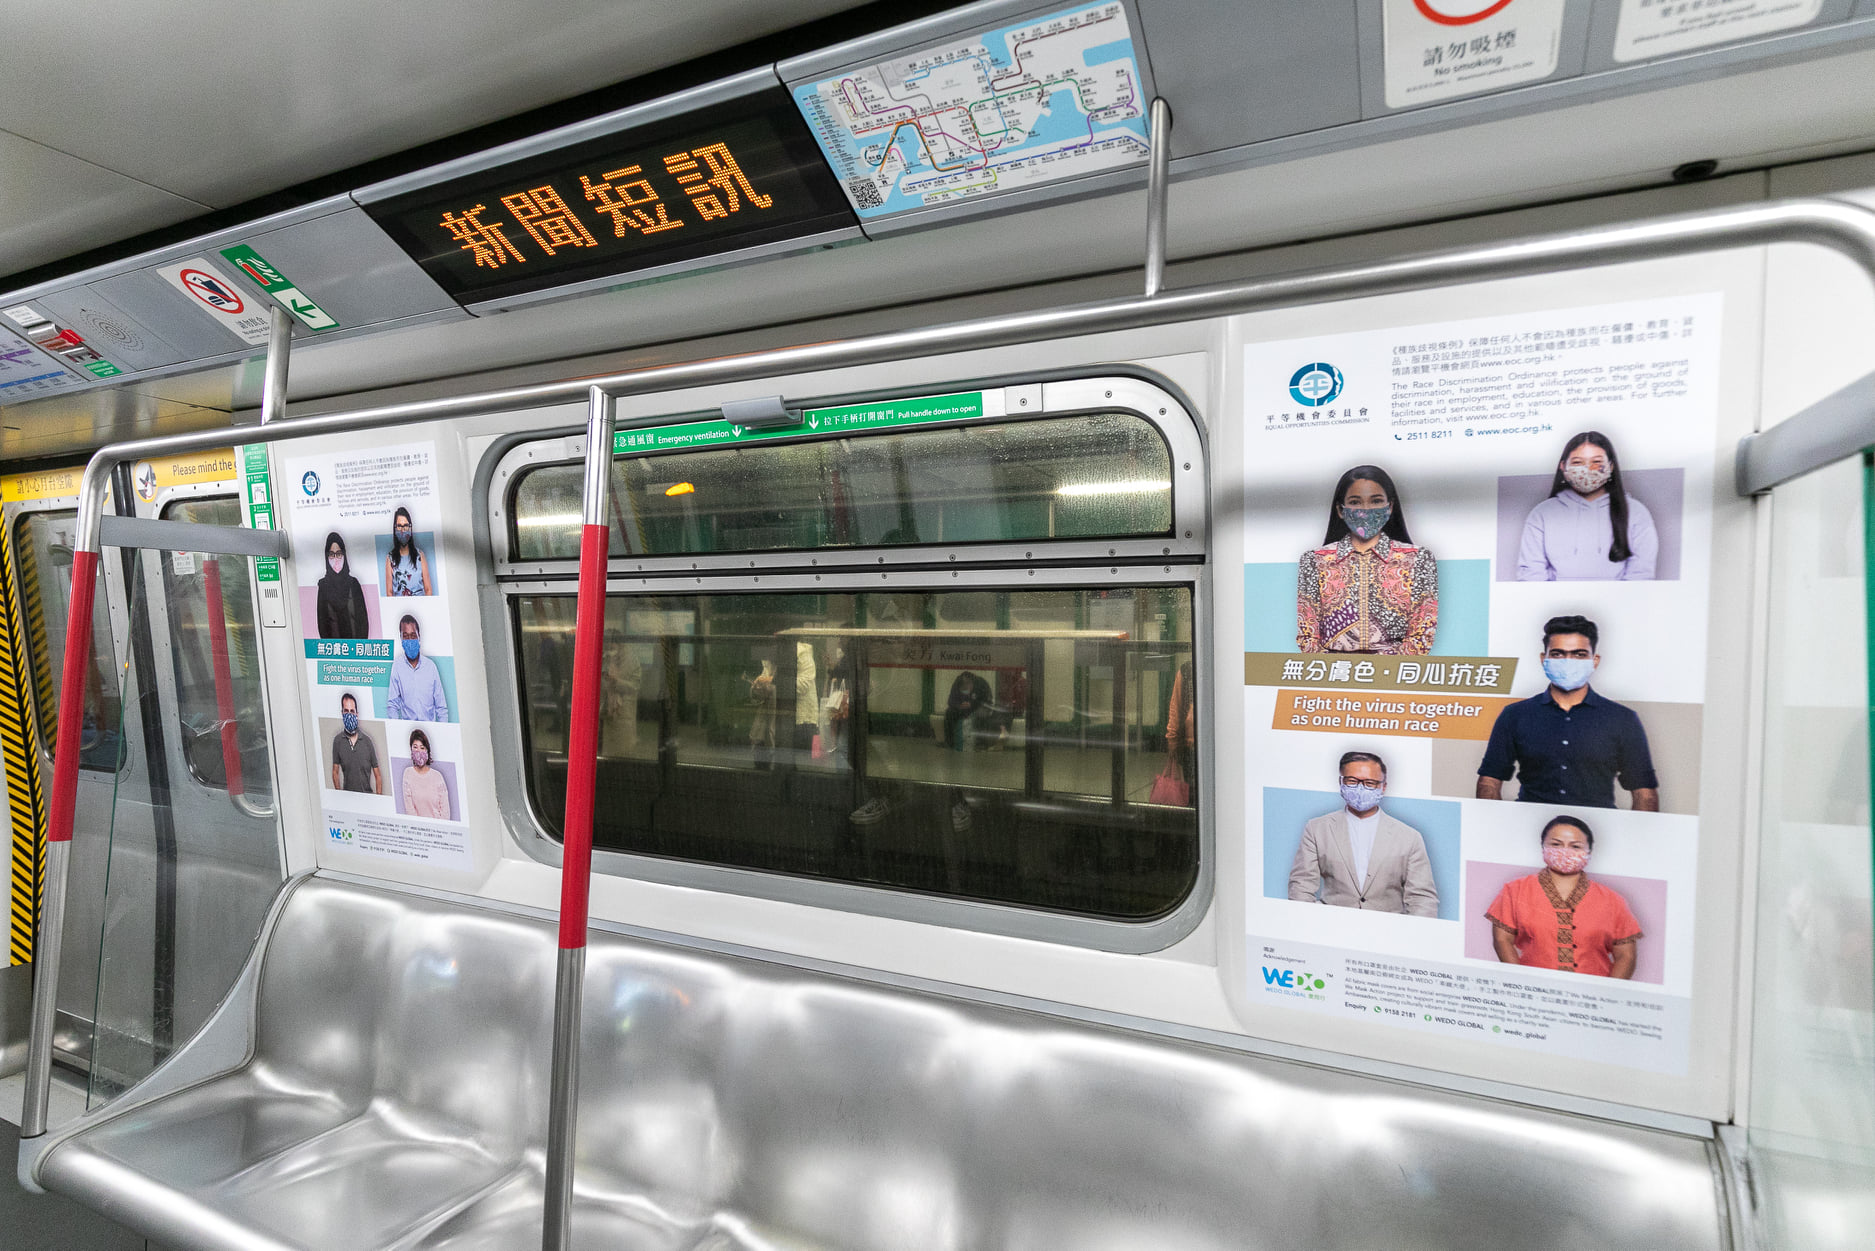 EOC rolls out MTR advertising campaign to promote racial equality